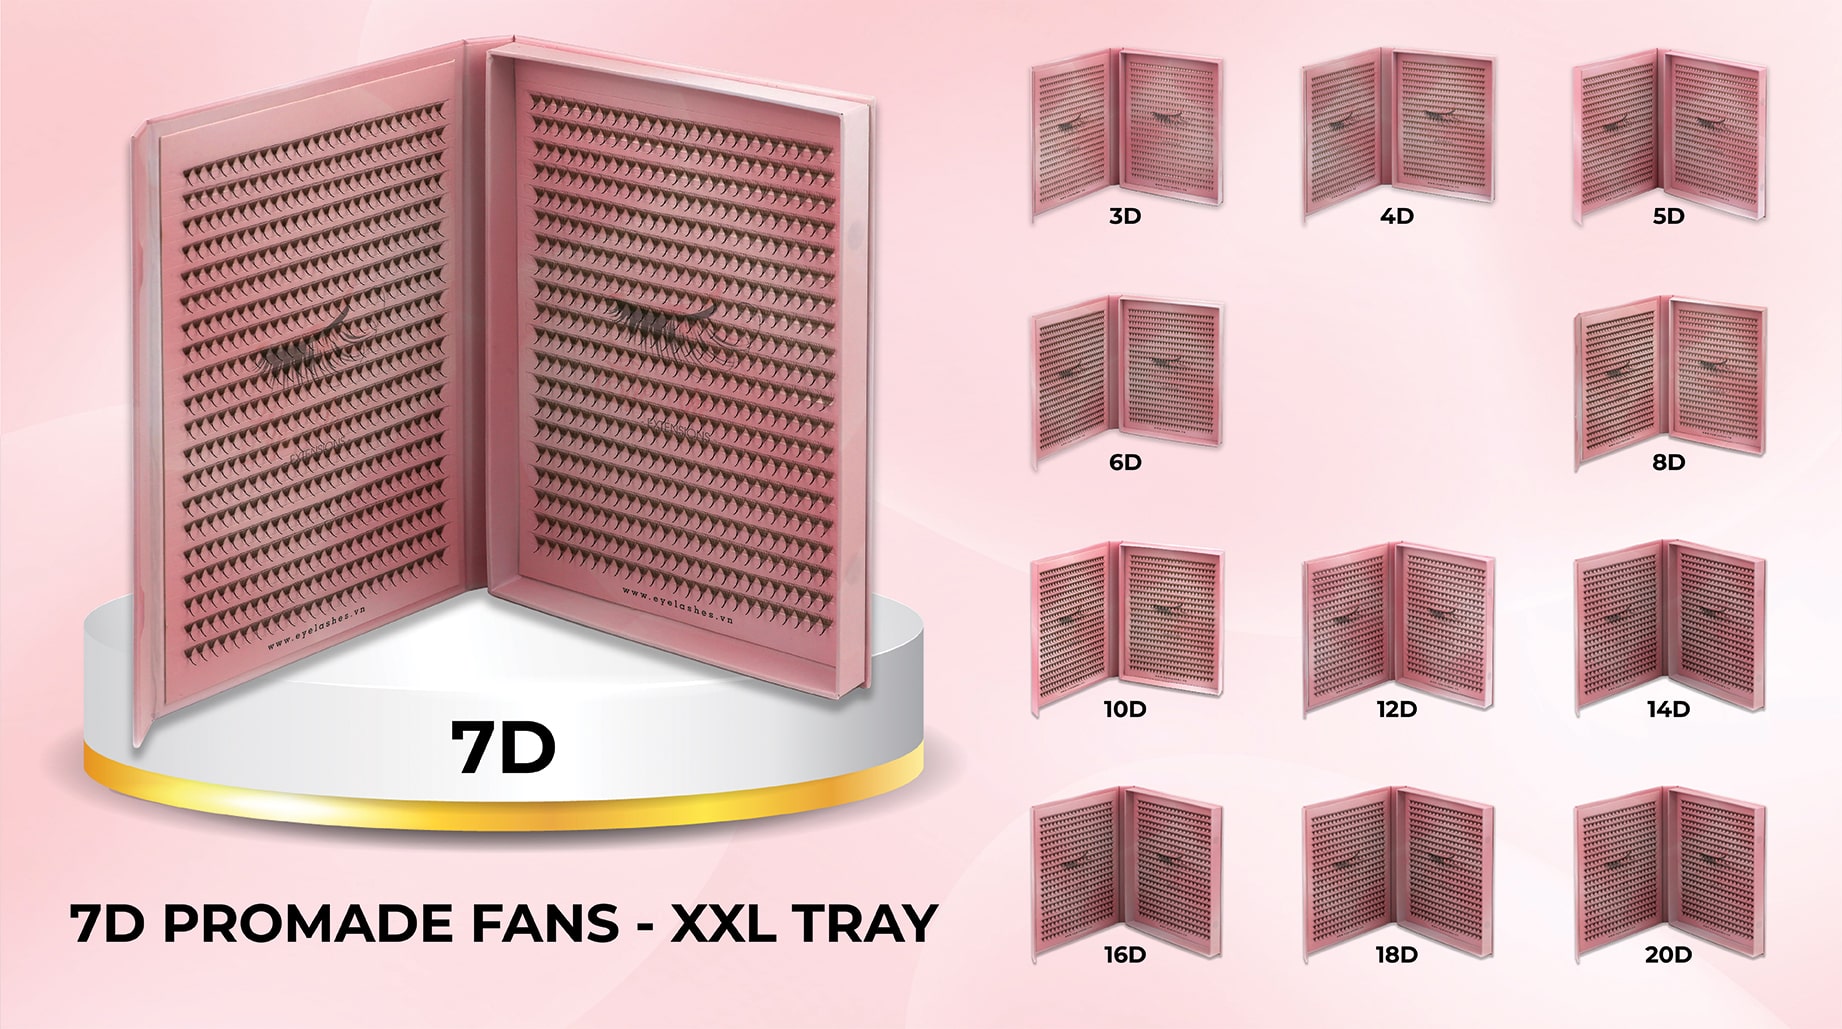 7D-promade-fan-XXL-Tray-wholesale-eyelash-supplier-VNLASHES